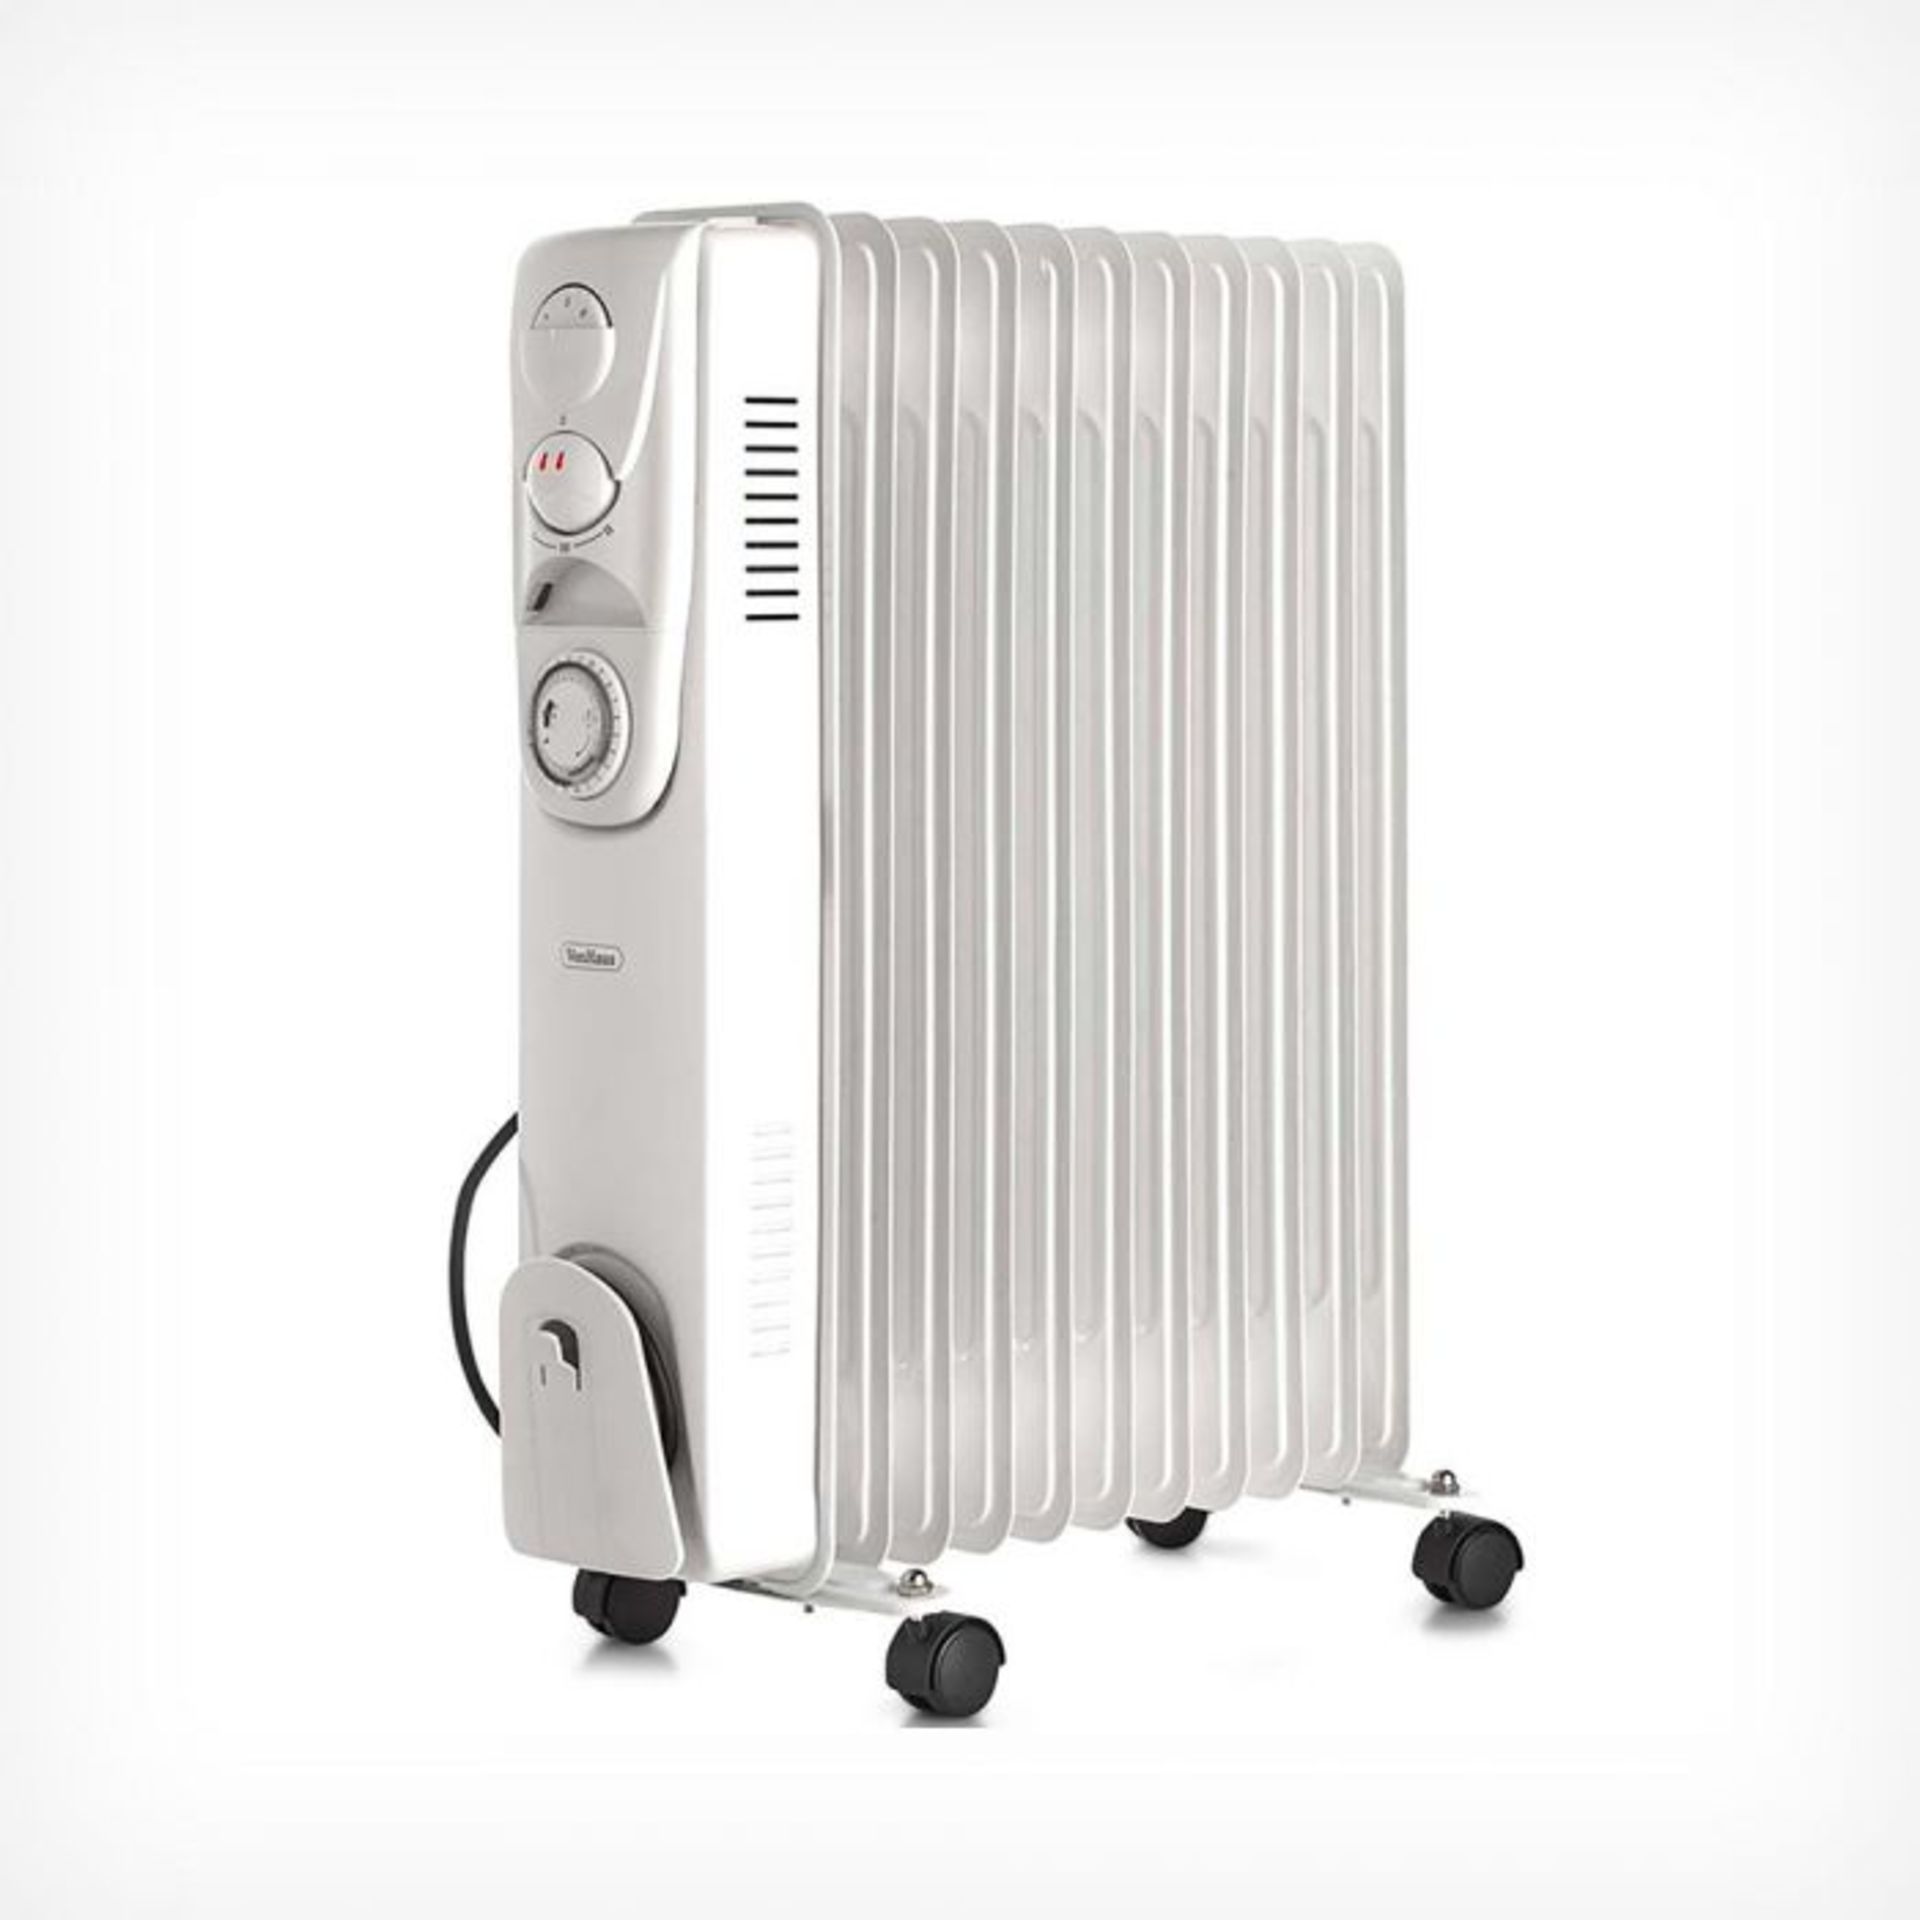 (S13) 11 Fin 2500W Oil Filled Radiator - White Suitable for areas up to 28 square metres 3 po... - Image 2 of 4